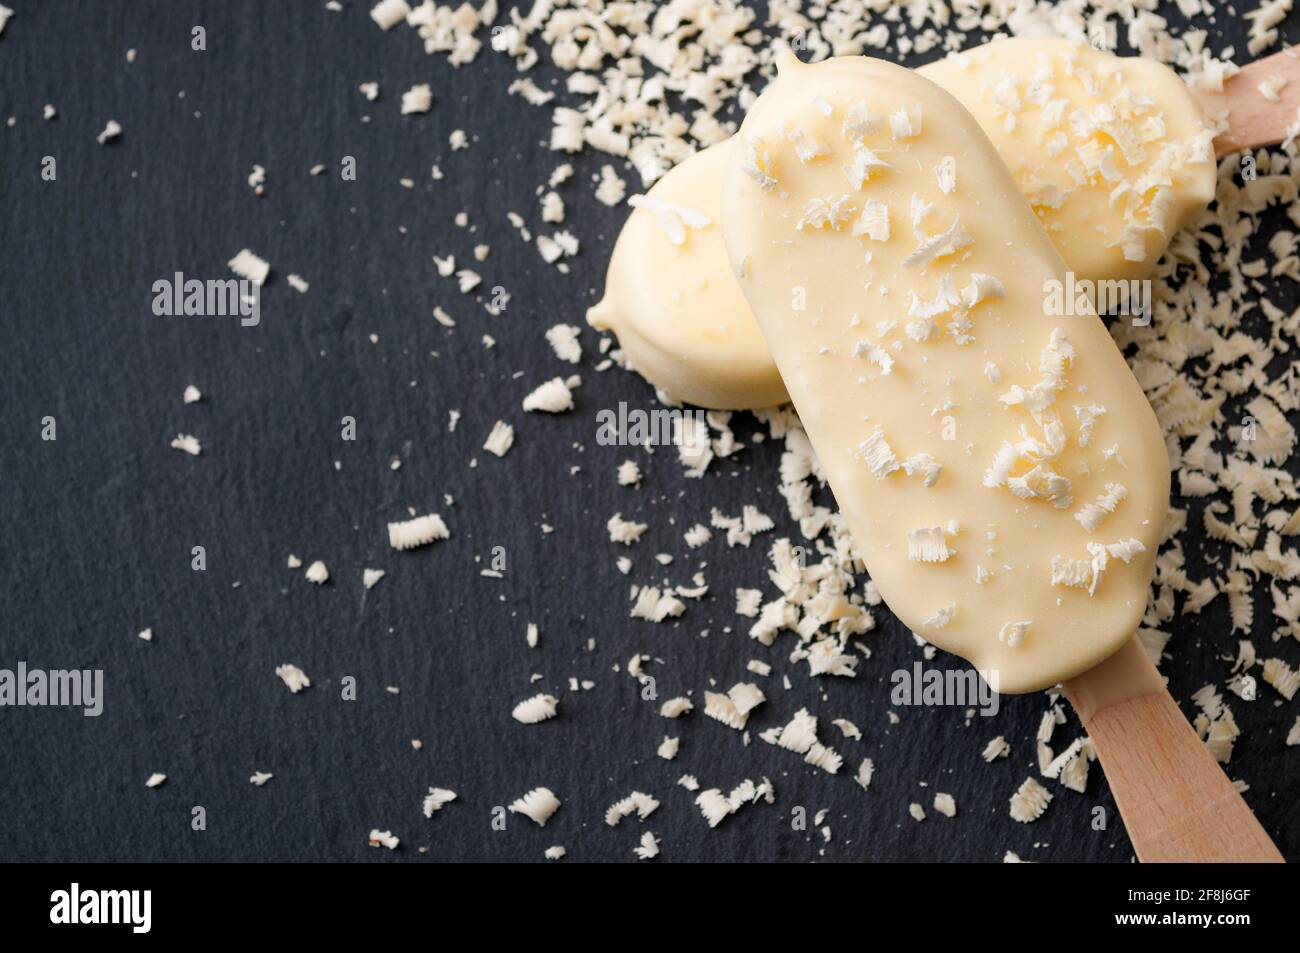 Summer desserts and cold snacks concept with two ice cream bars on a stick or lollies, surrounded by white chocolate shavings  on a dark black stone b Stock Photo